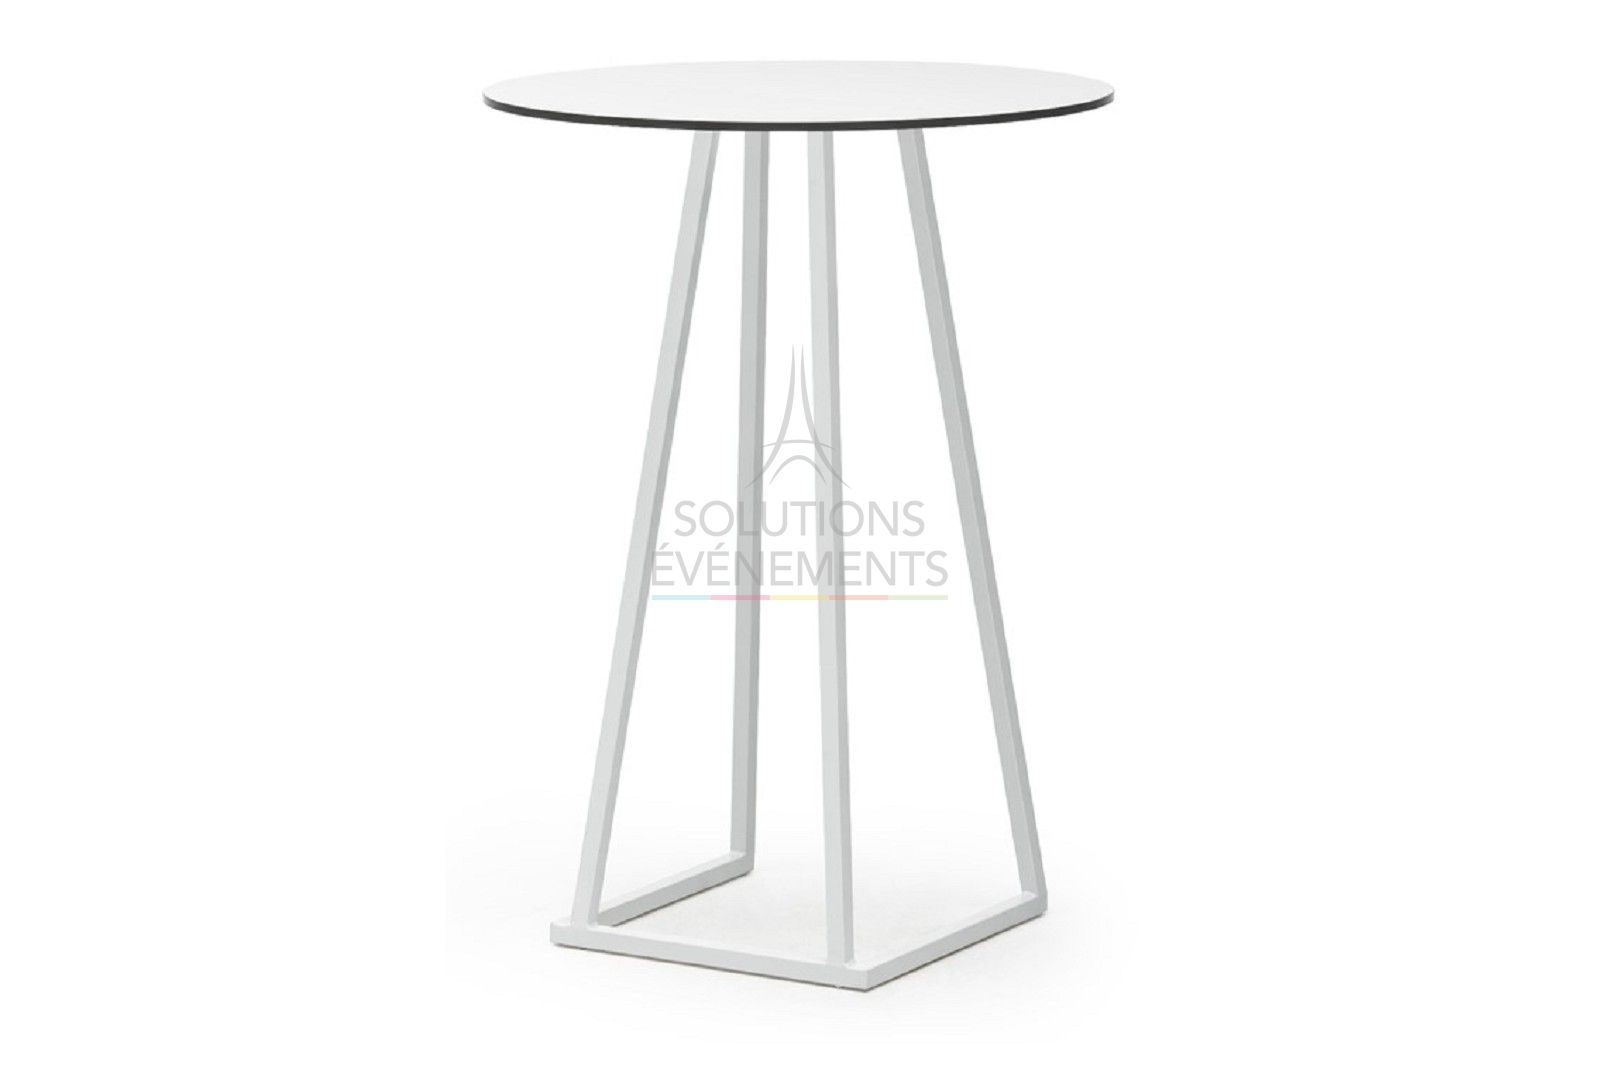 Rental of white high table with rounded top